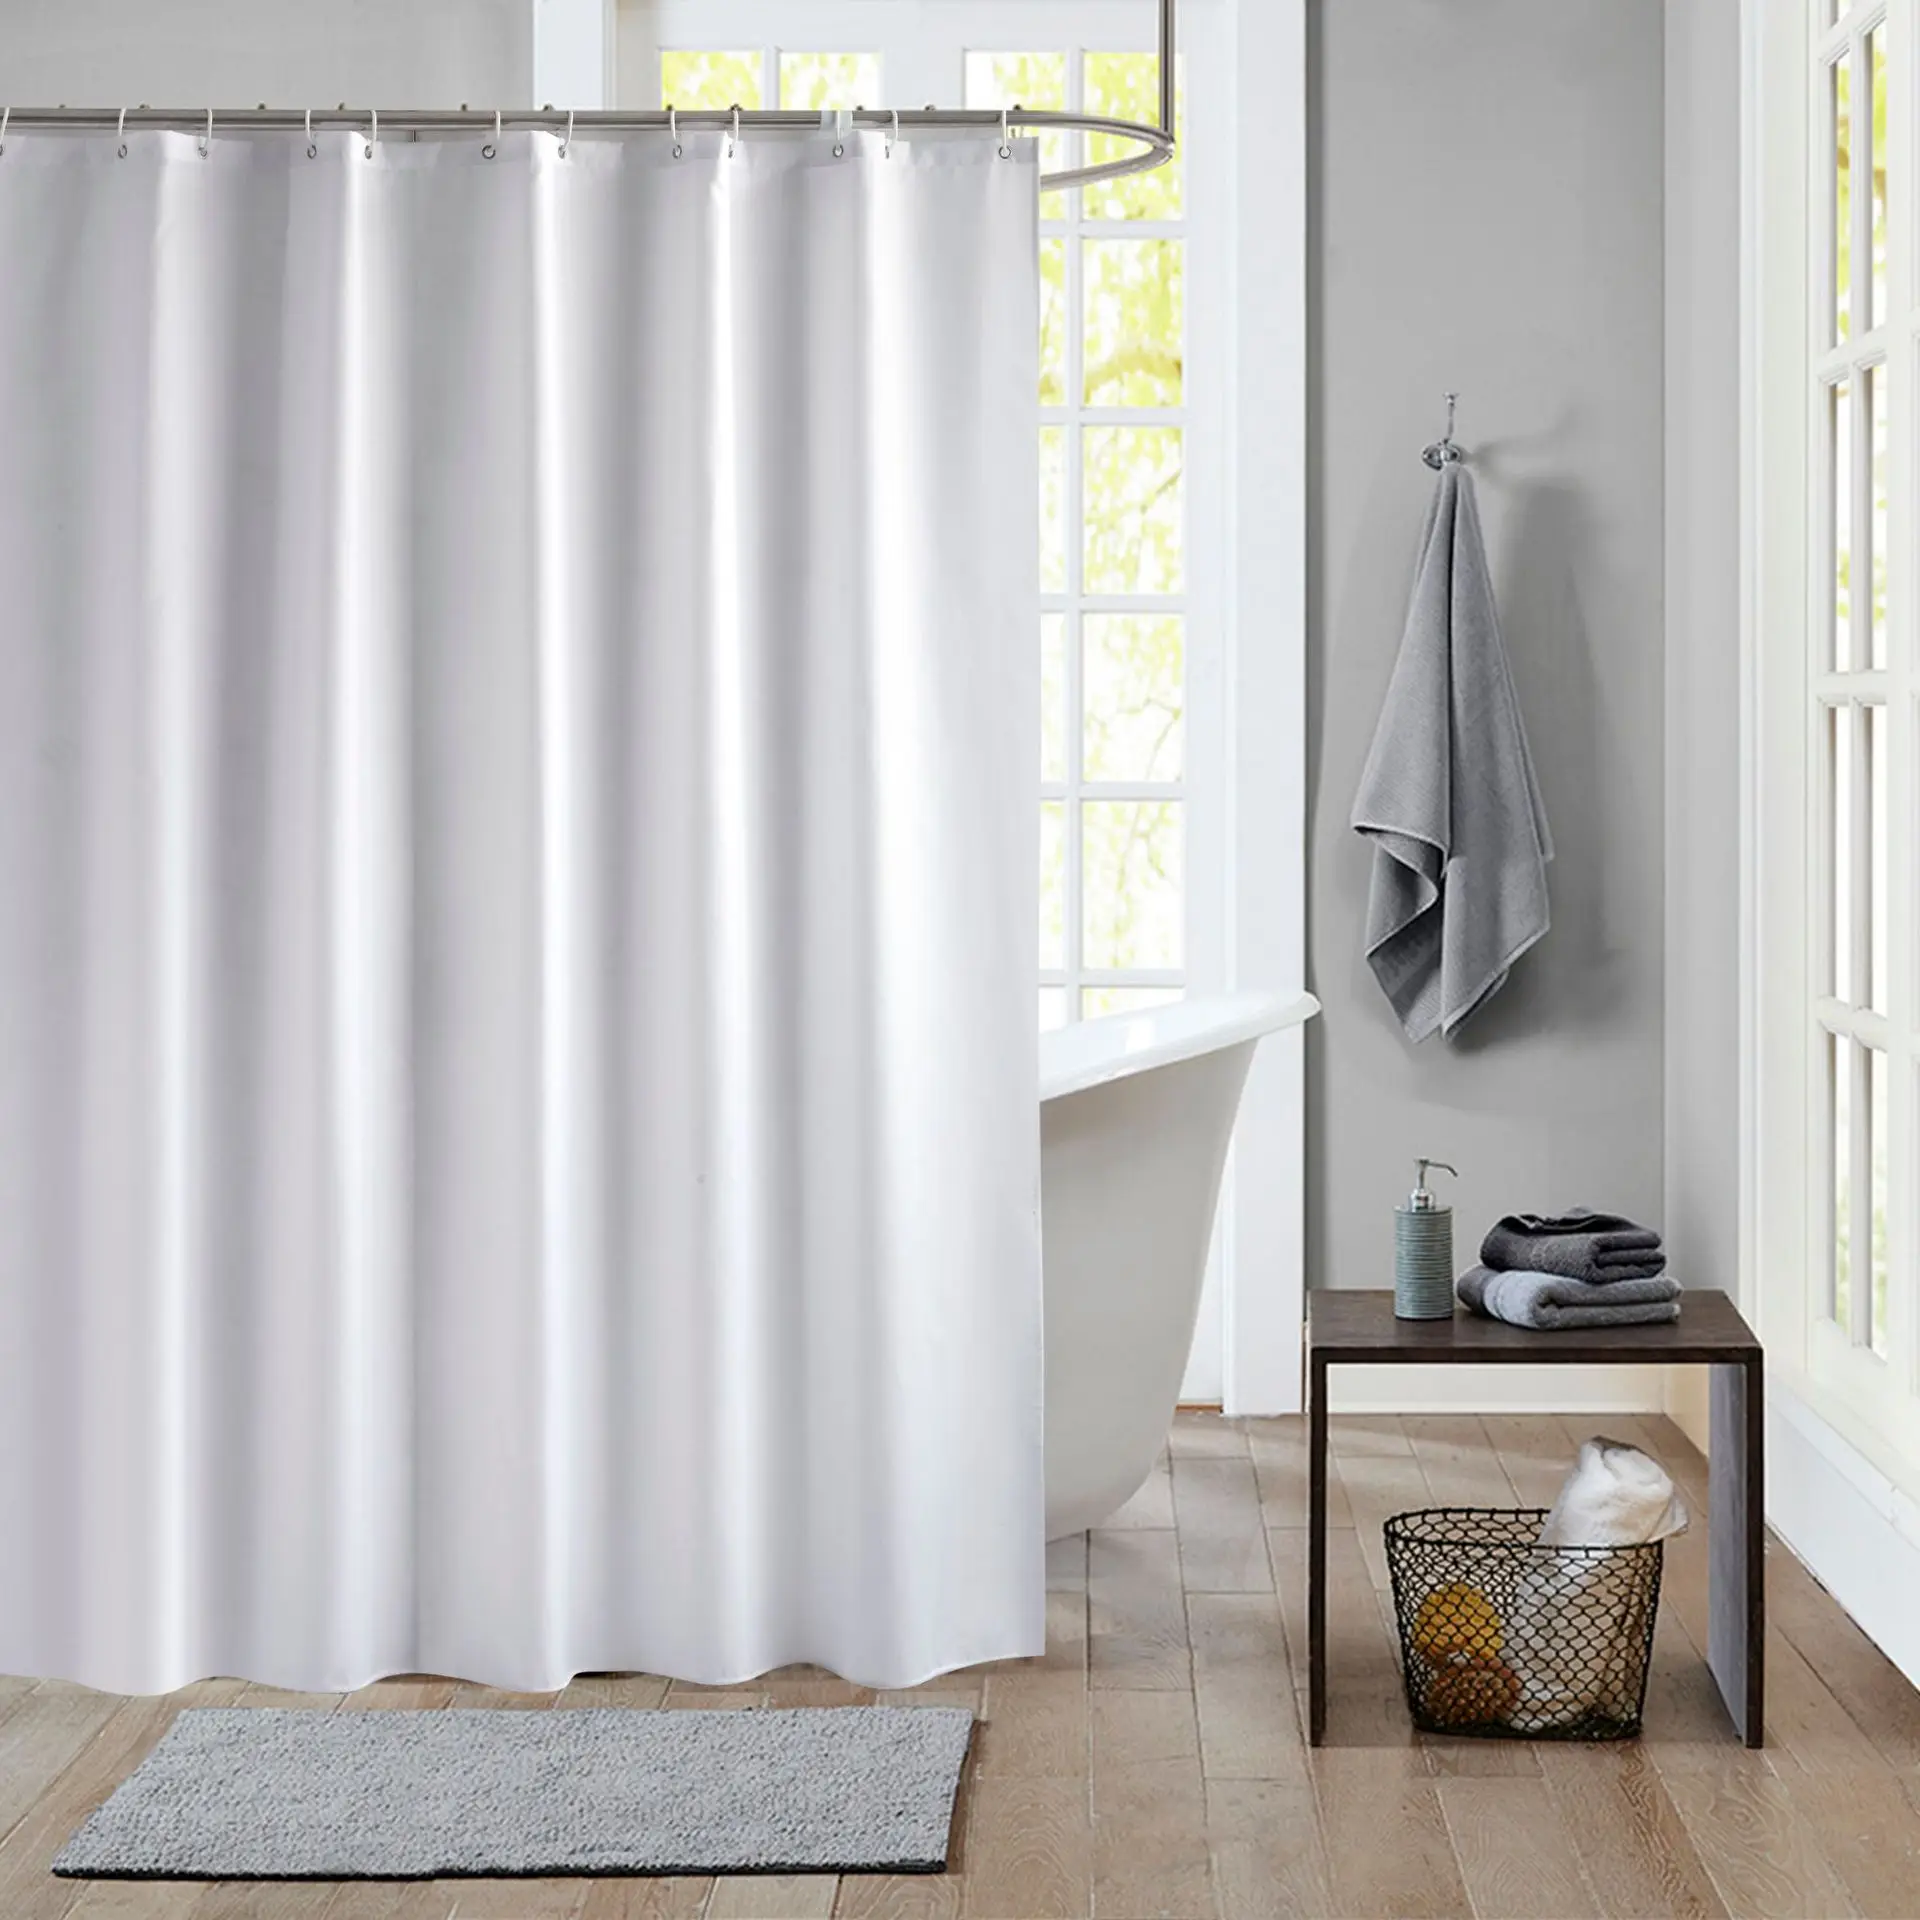 Liner - Soft Hotel Quality Cloth Shower Liner, Light-weight & Machine Washable